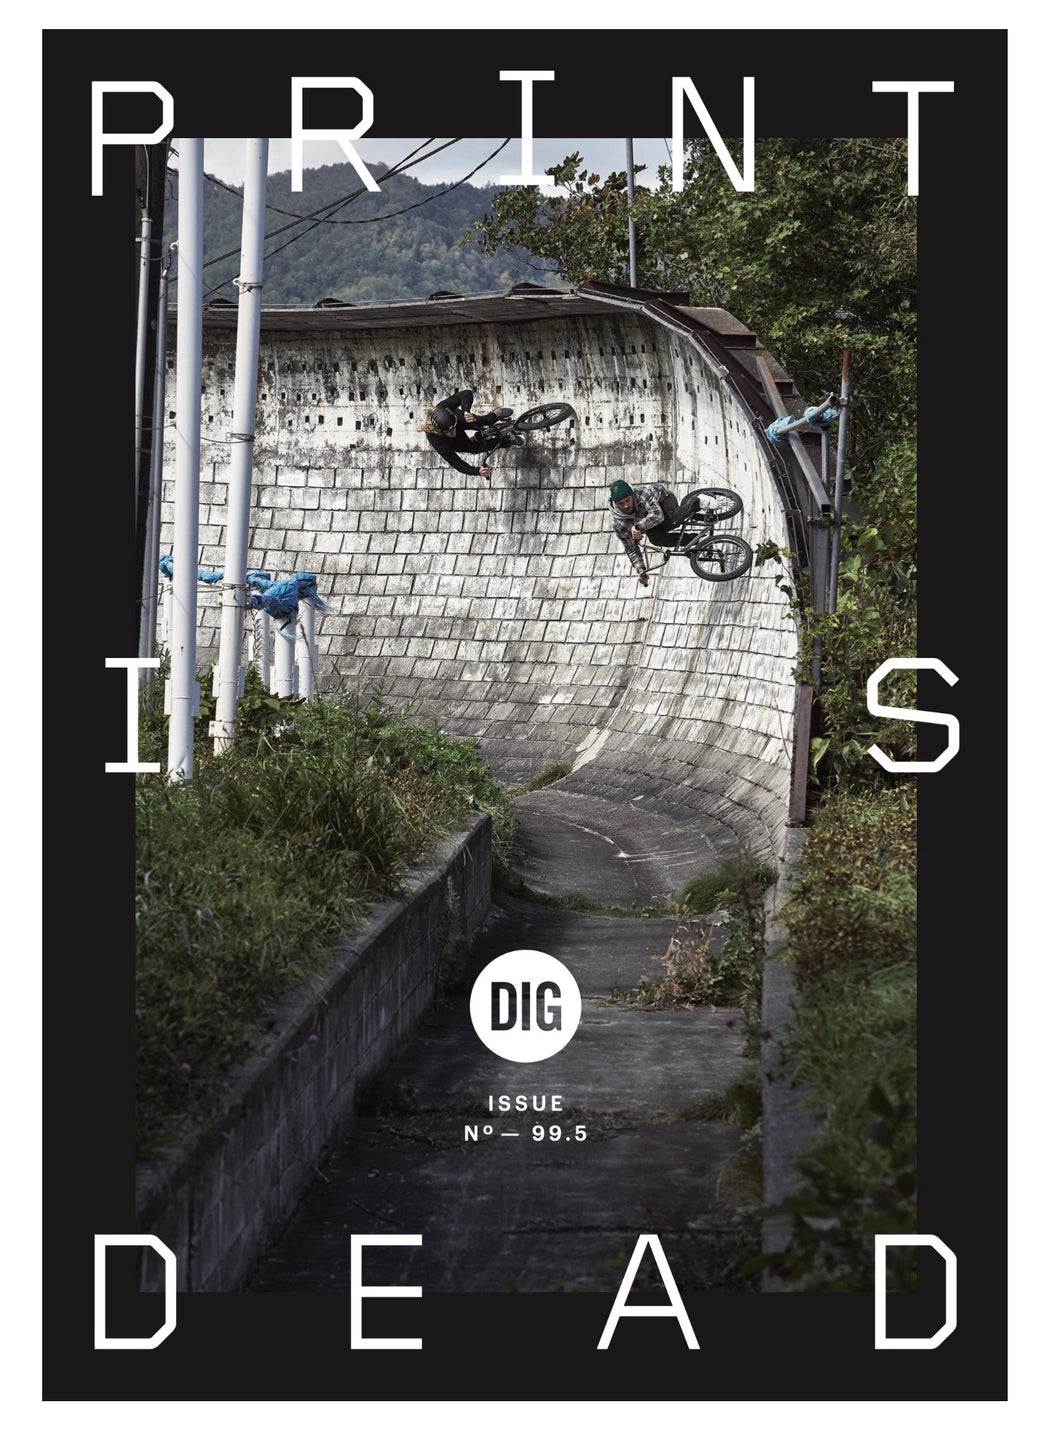 'PRINT IS DEAD' -  DIG MAGAZINE ISSUE 99.5